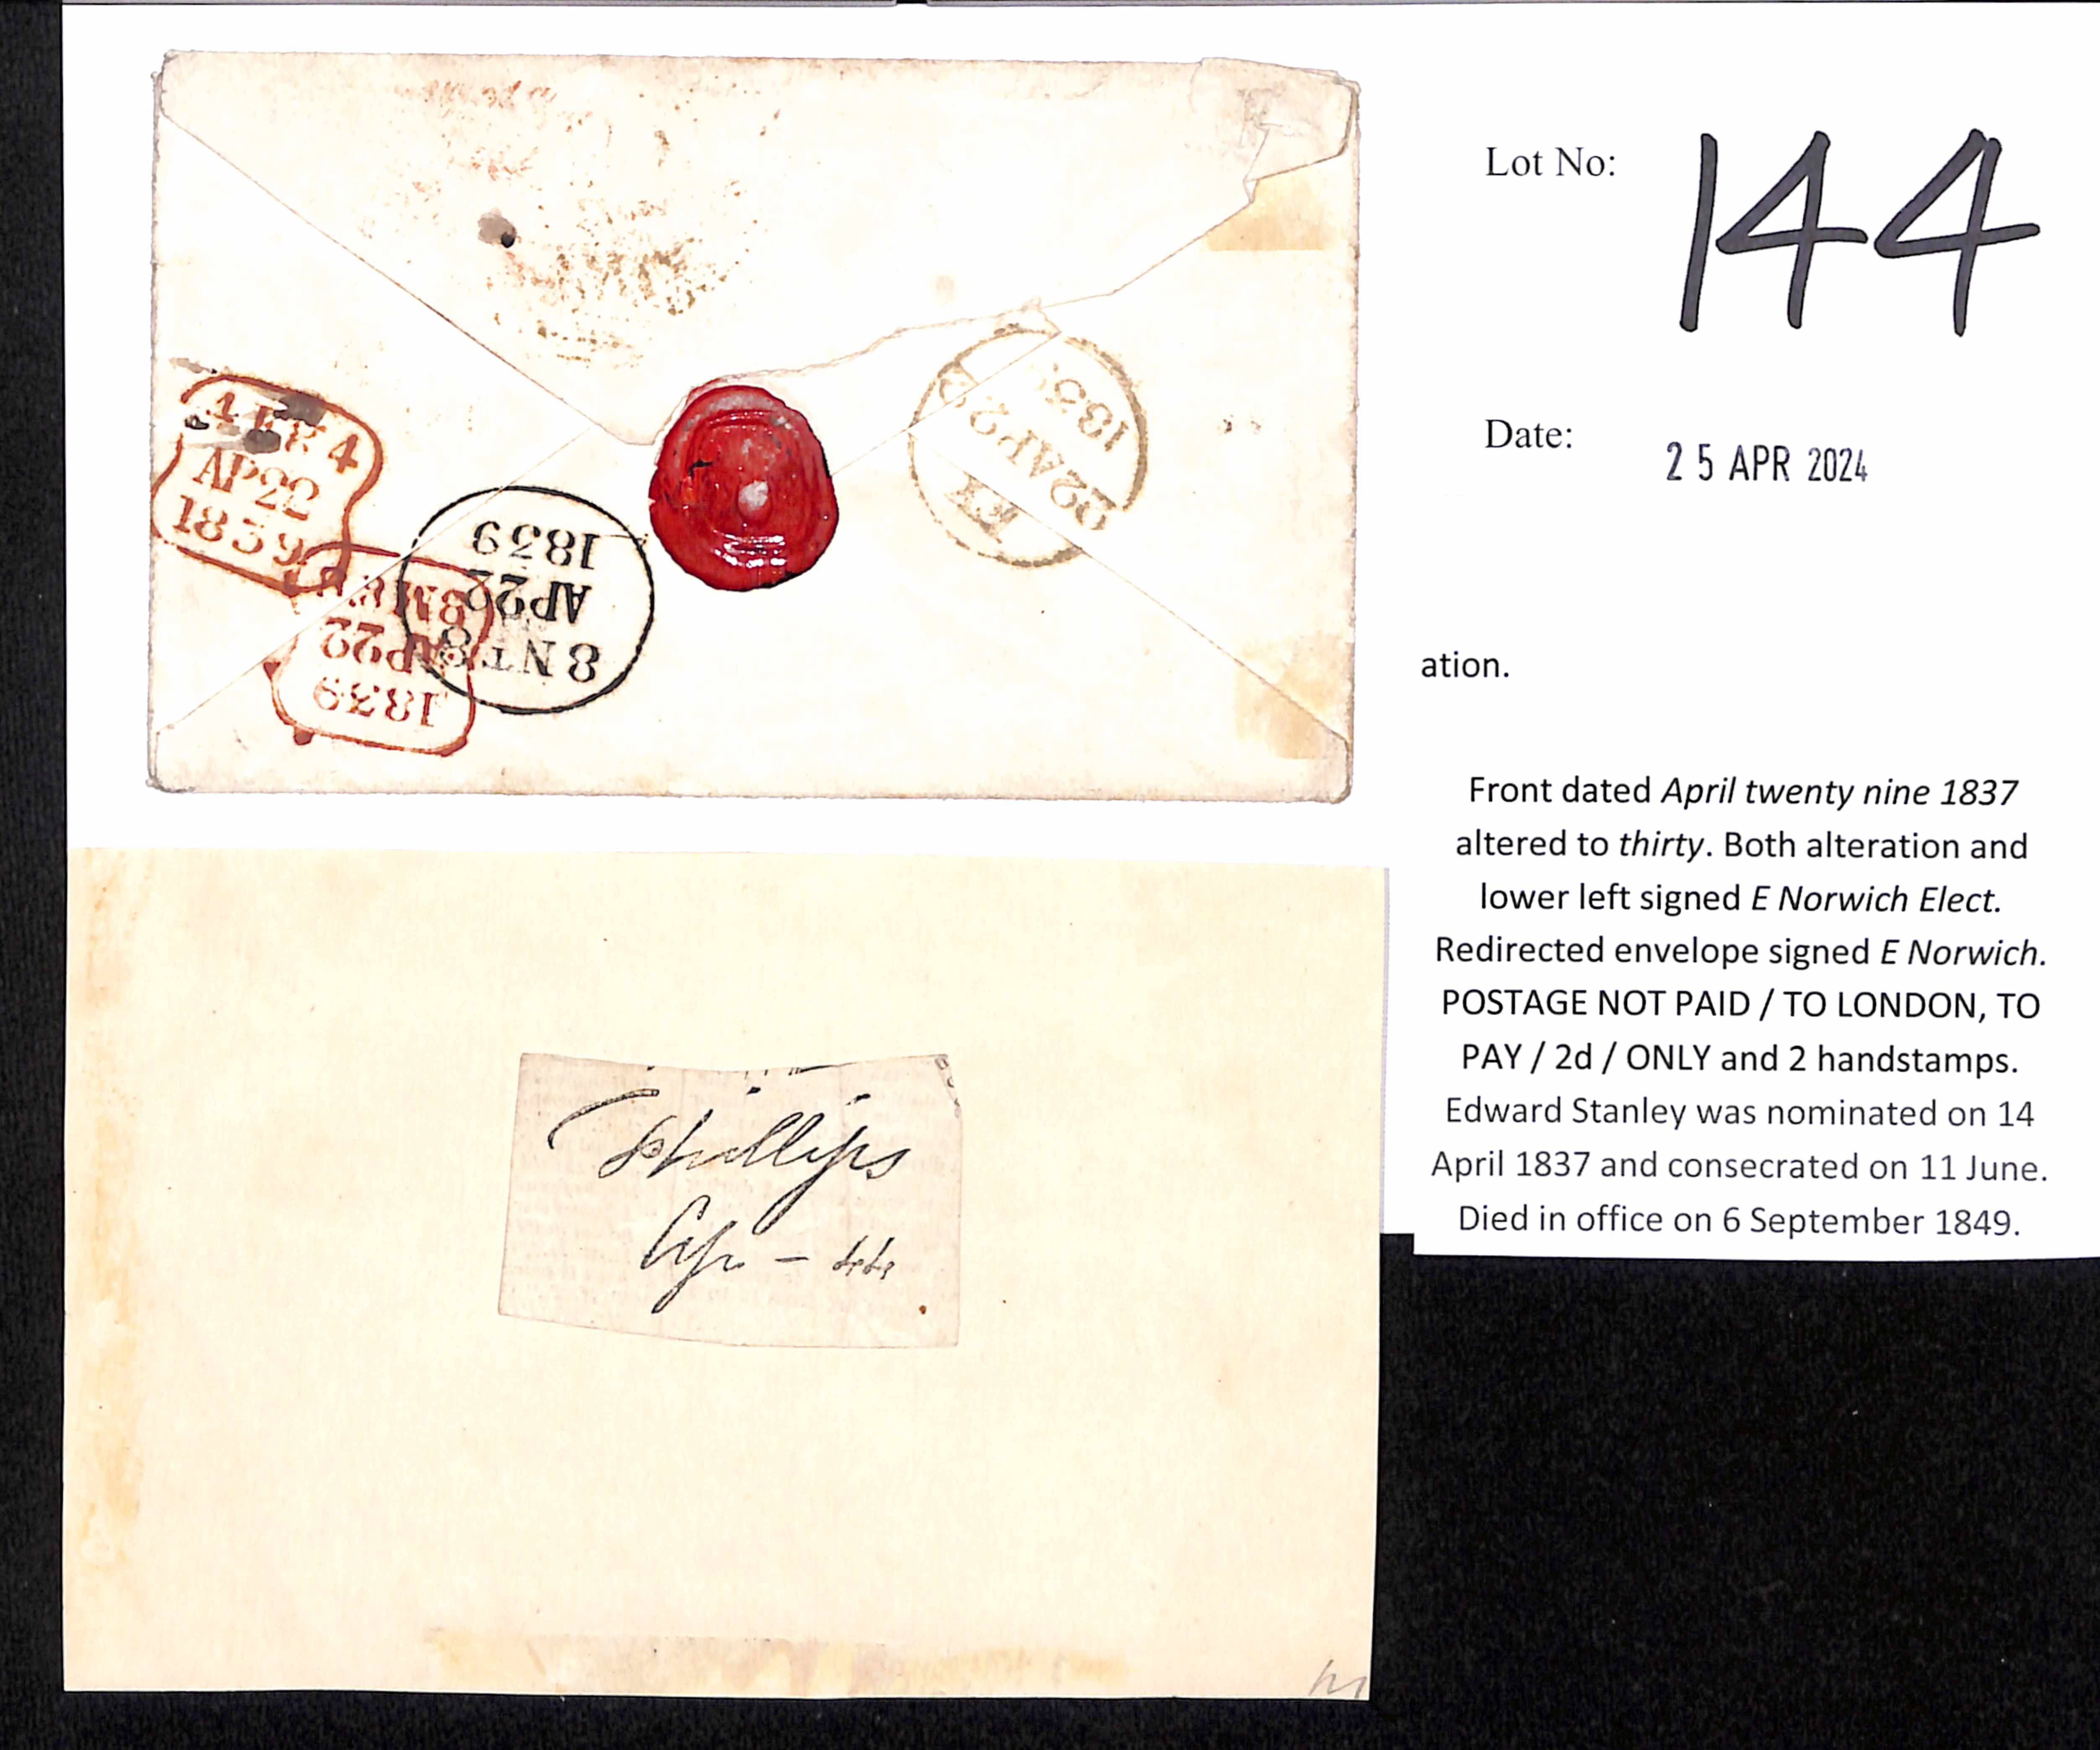 1837-39 Front and envelope from the Bishop of Norwich, the front posted on April 30 1837 during - Image 3 of 4